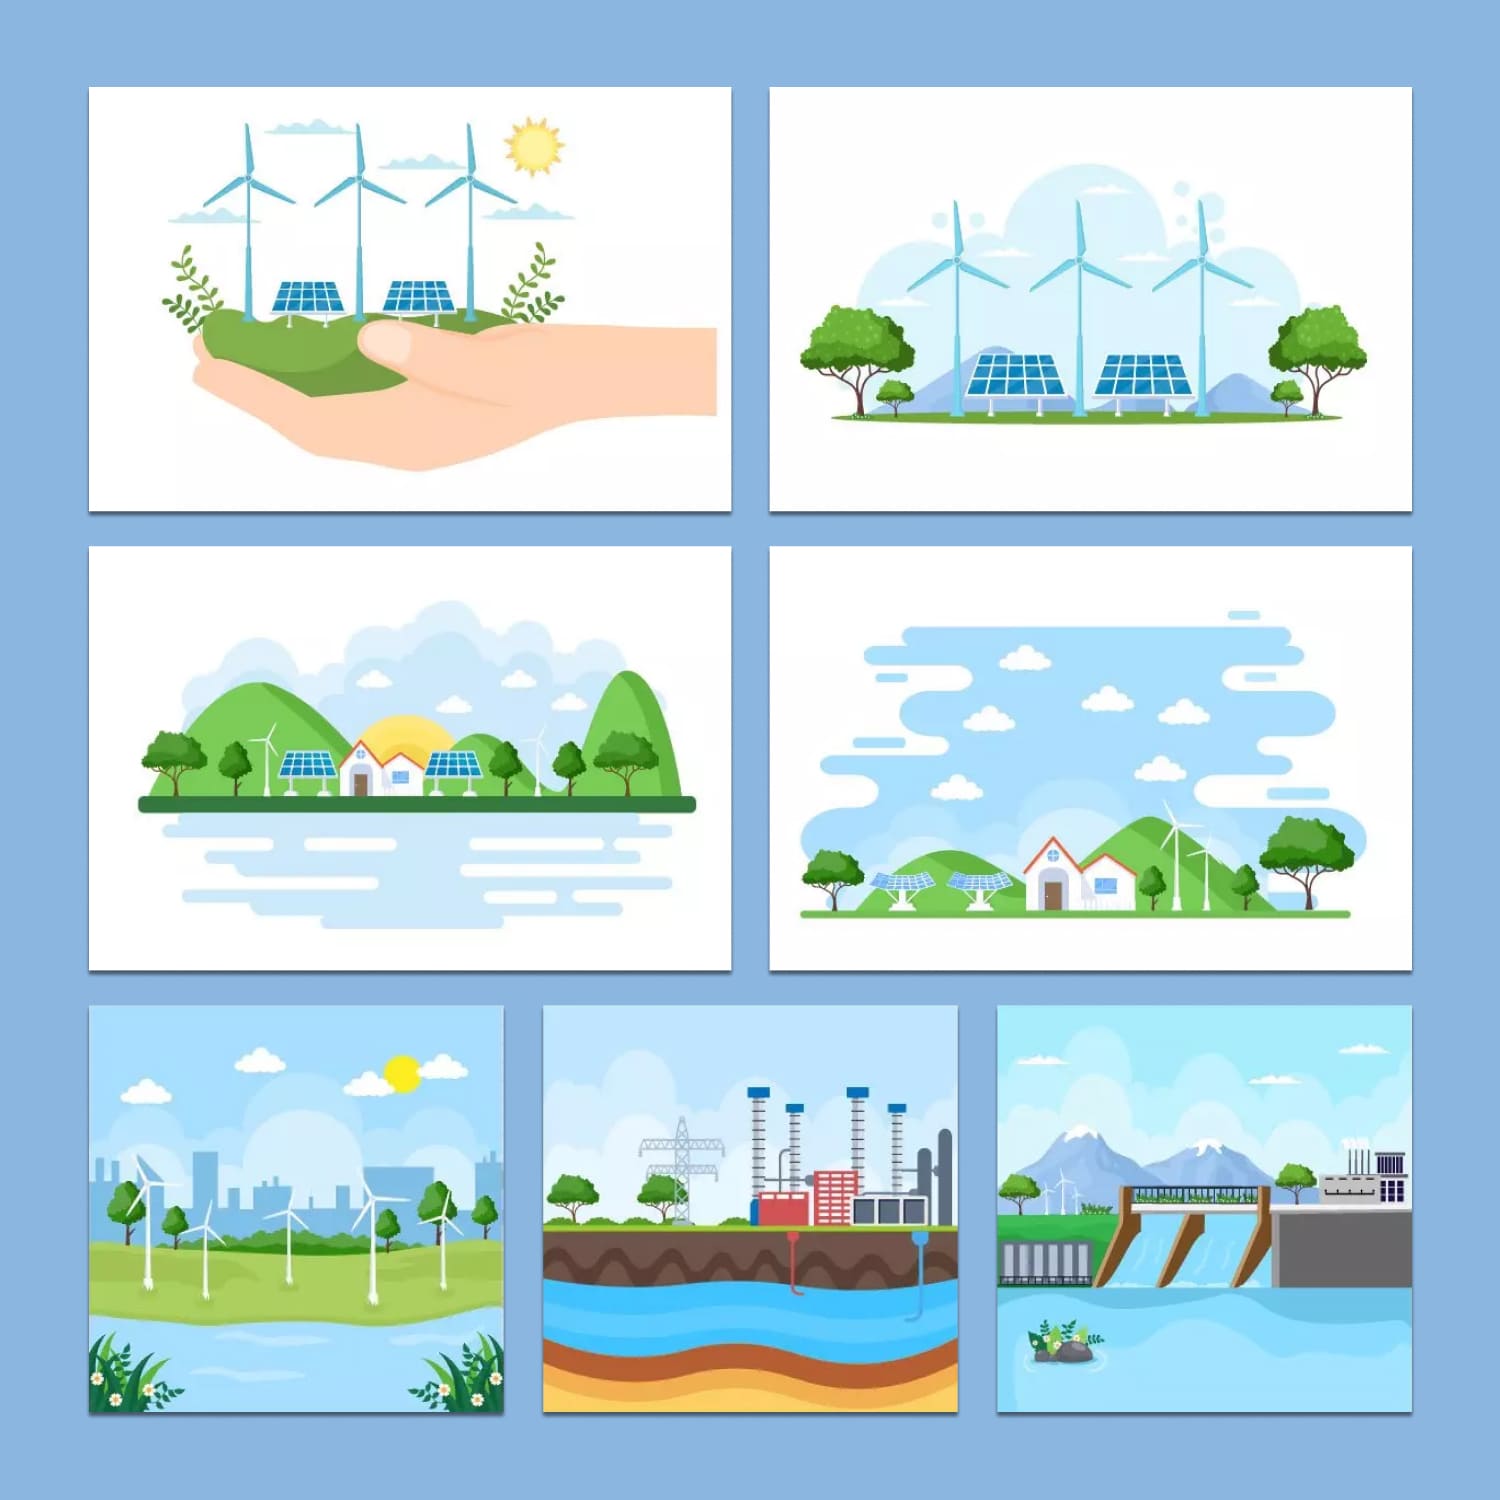 21 Ecological Sustainable Energy Supply Illustrations cover.